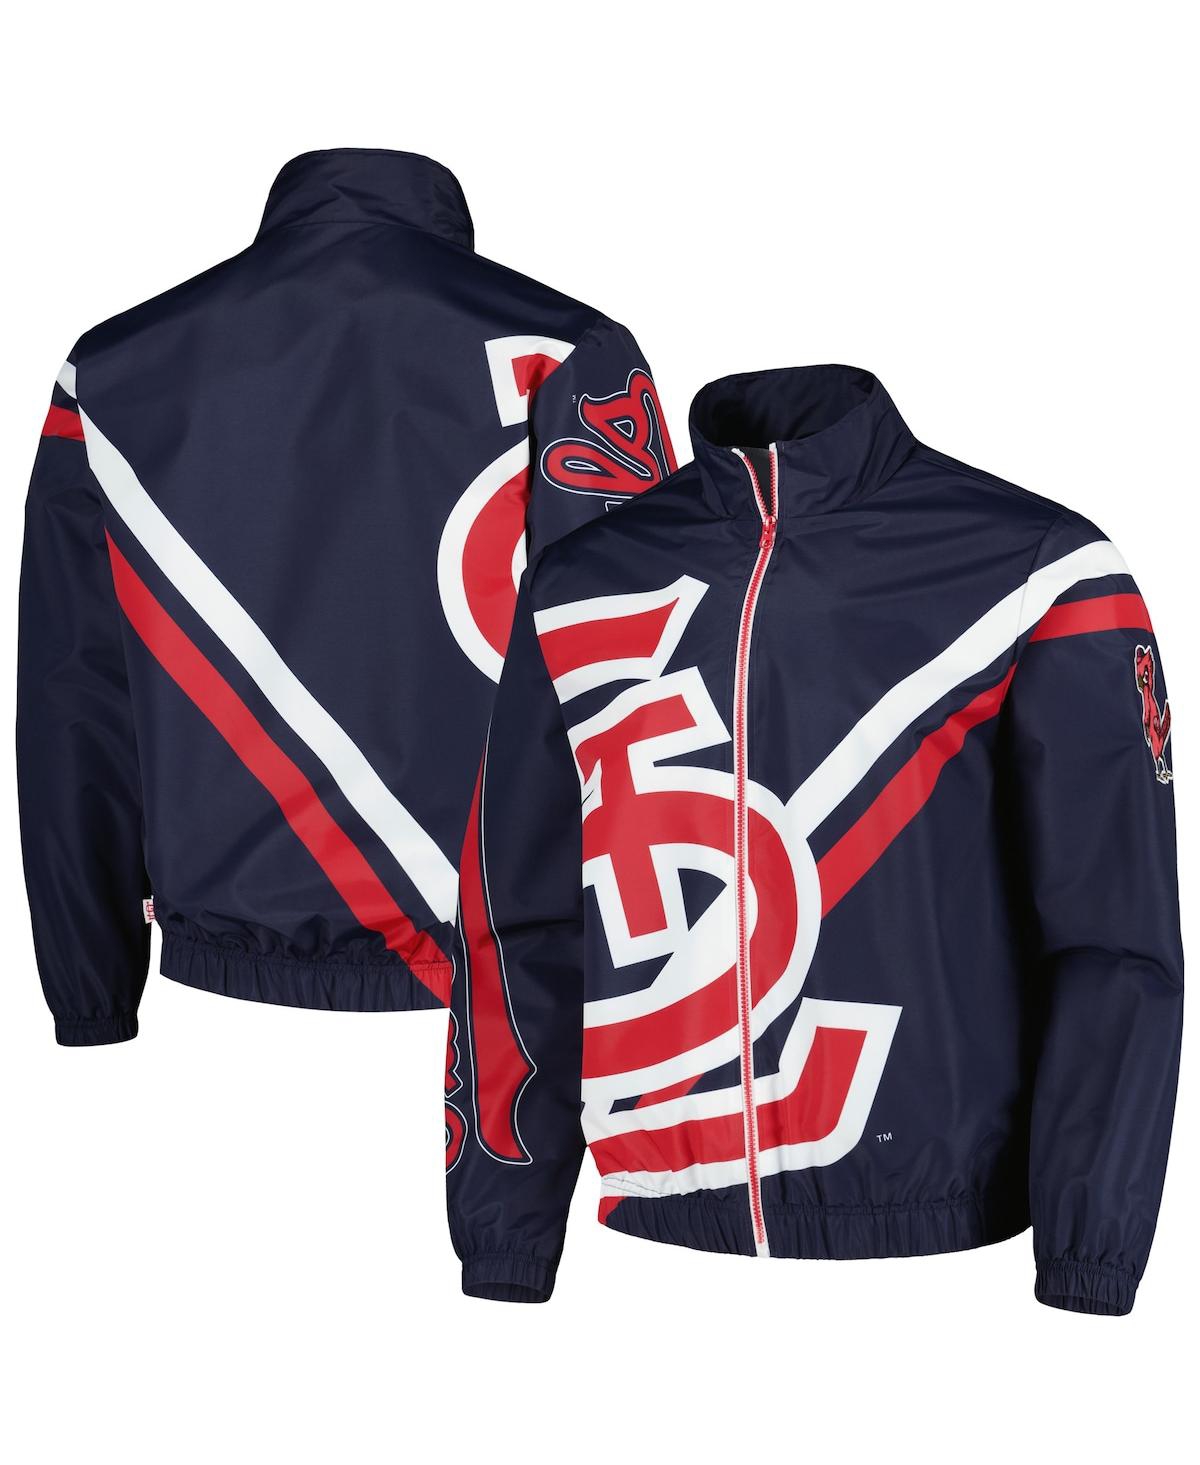 Exploded Logo Warm Up Jacket St. Louis Cardinals - Shop Mitchell & Ness  Outerwear and Jackets Mitchell & Ness Nostalgia Co.